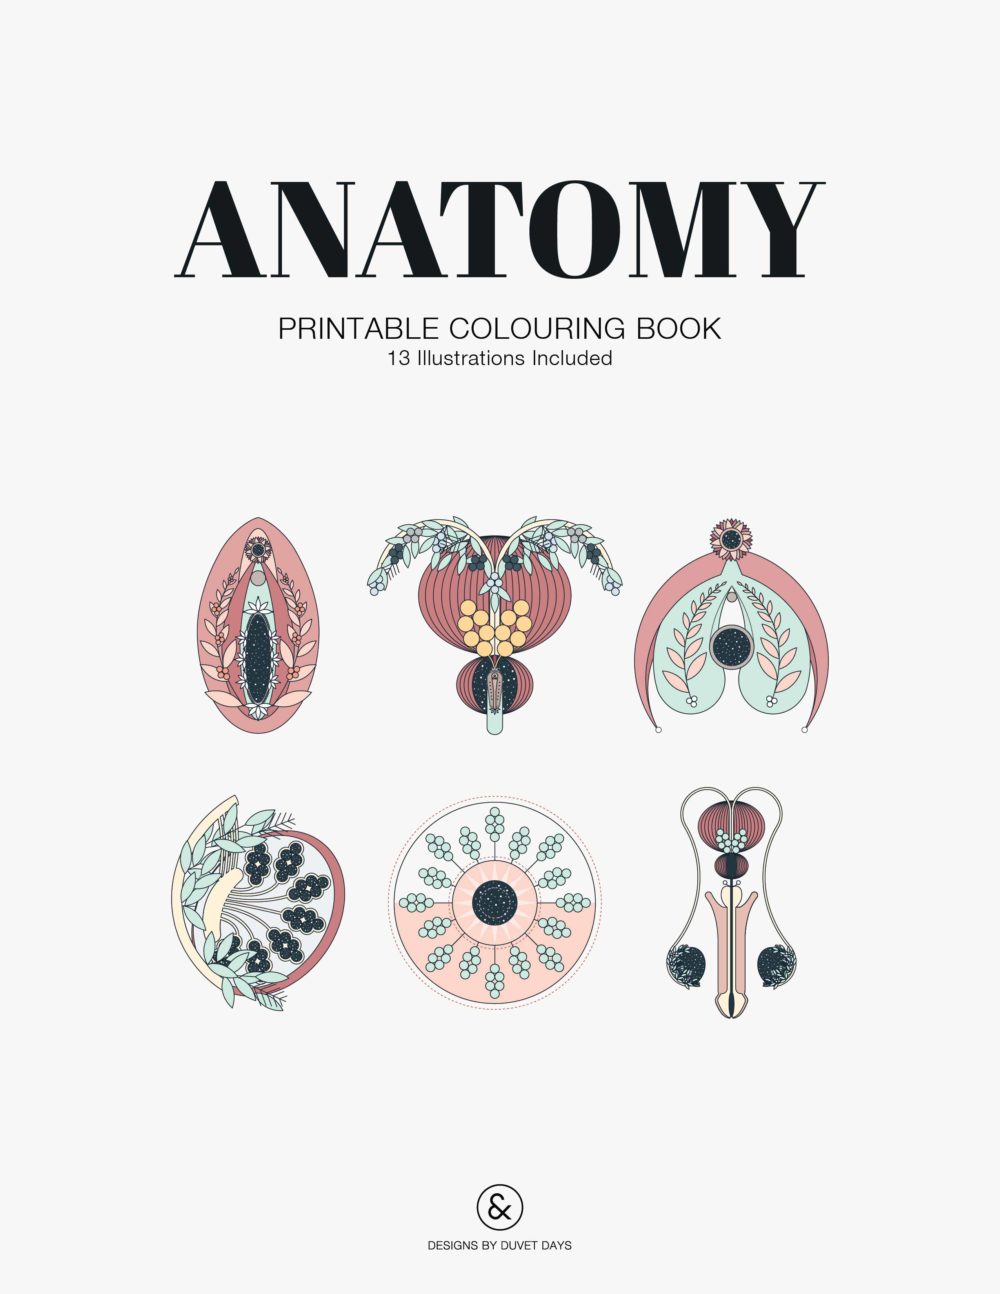 anatomy_colouring book_Preview-01